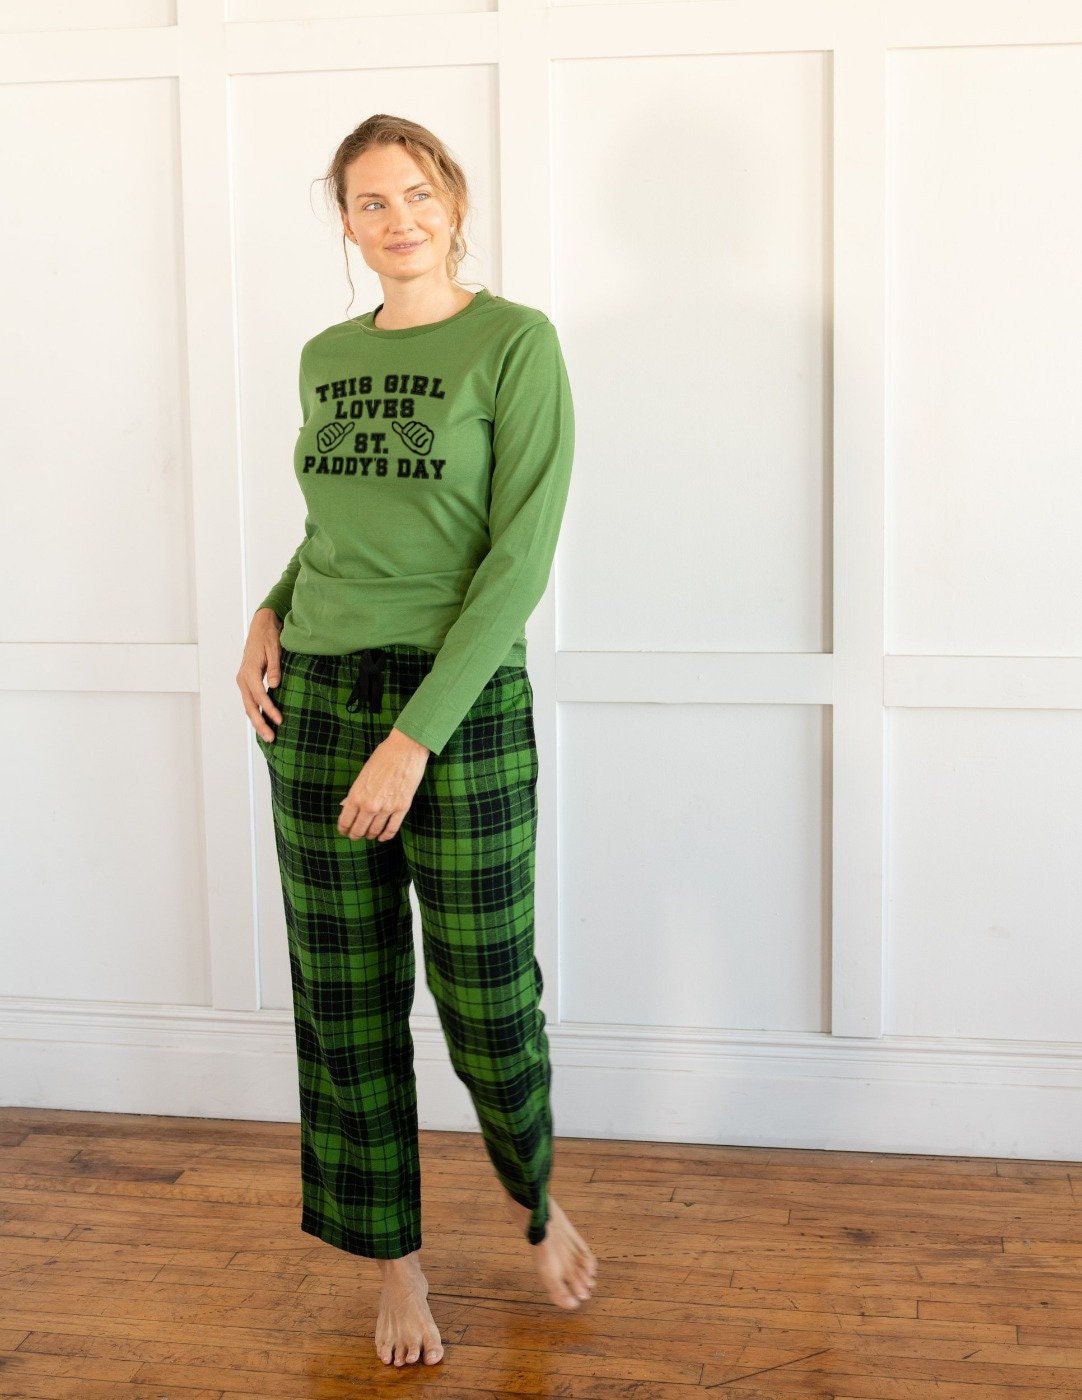 This Girl Loves St Paddy's Day Green Flannel Plaid St Patrick's Day Pajamas - Girl's St Paddy's Pjs, women's st paddy's pjs